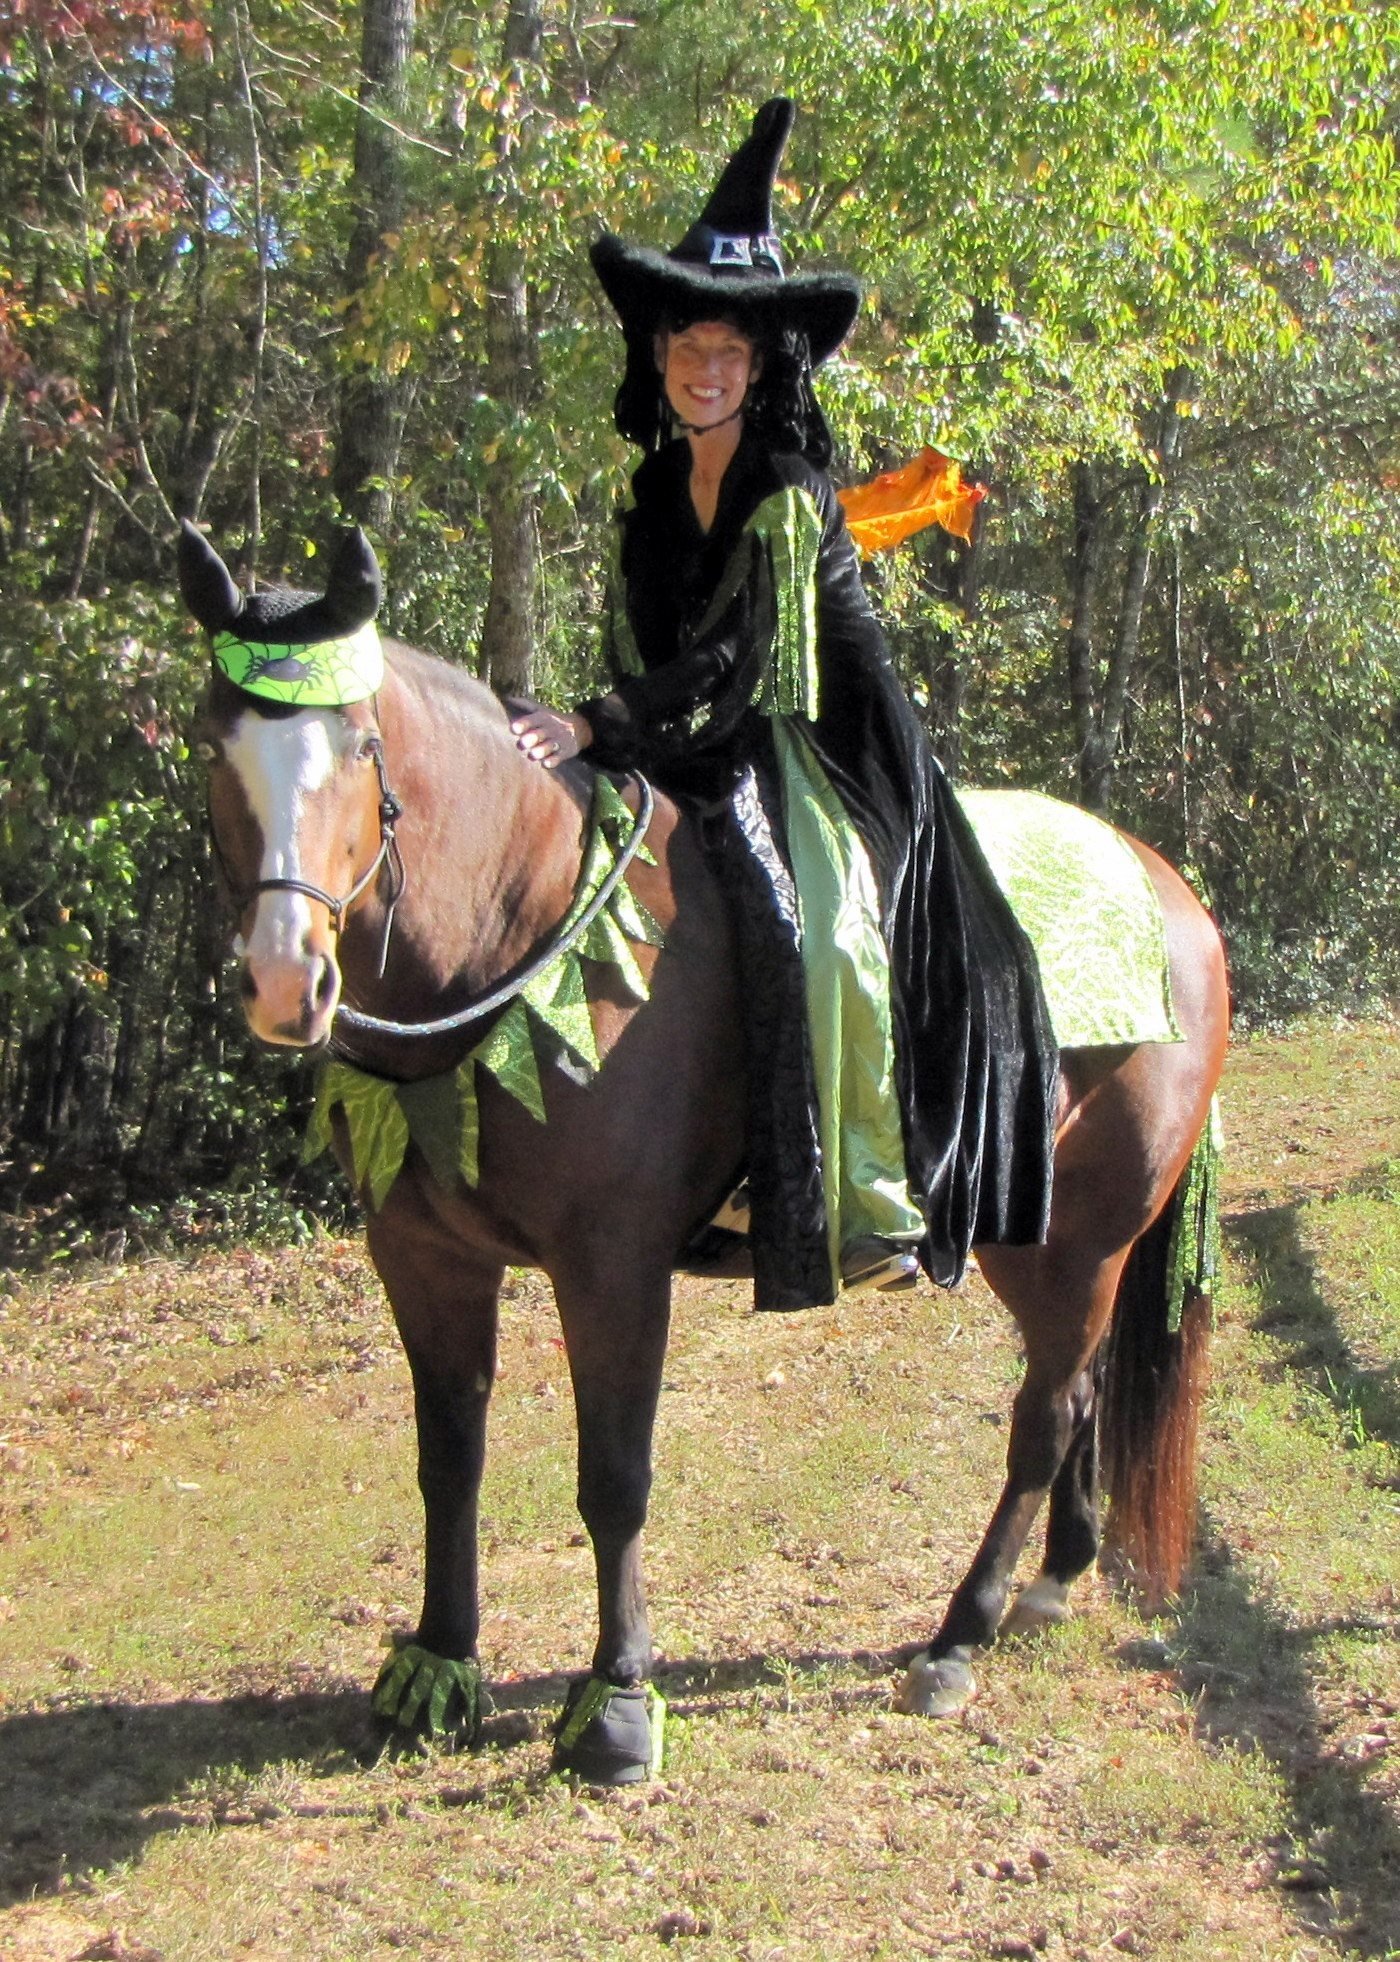 10 Spectacular Horse And Rider Costume Ideas check out some great horse costume ideas and try out a tasty horse 2022